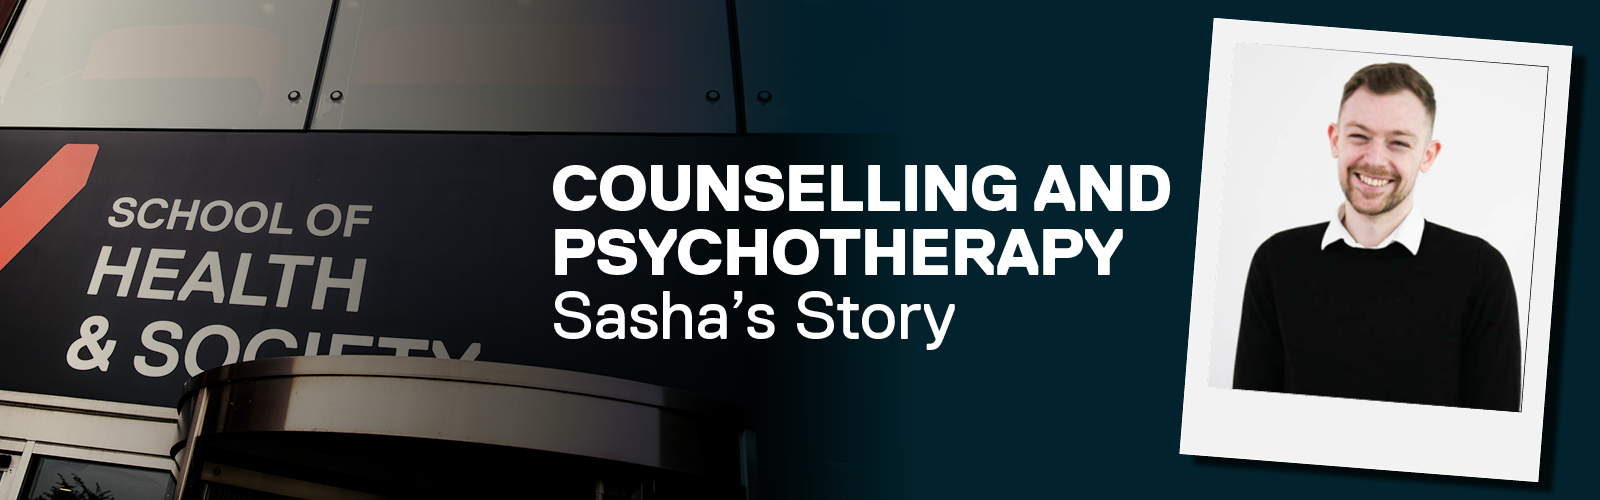 Counselling and Psychotherapy Blog Image - Sasha's story